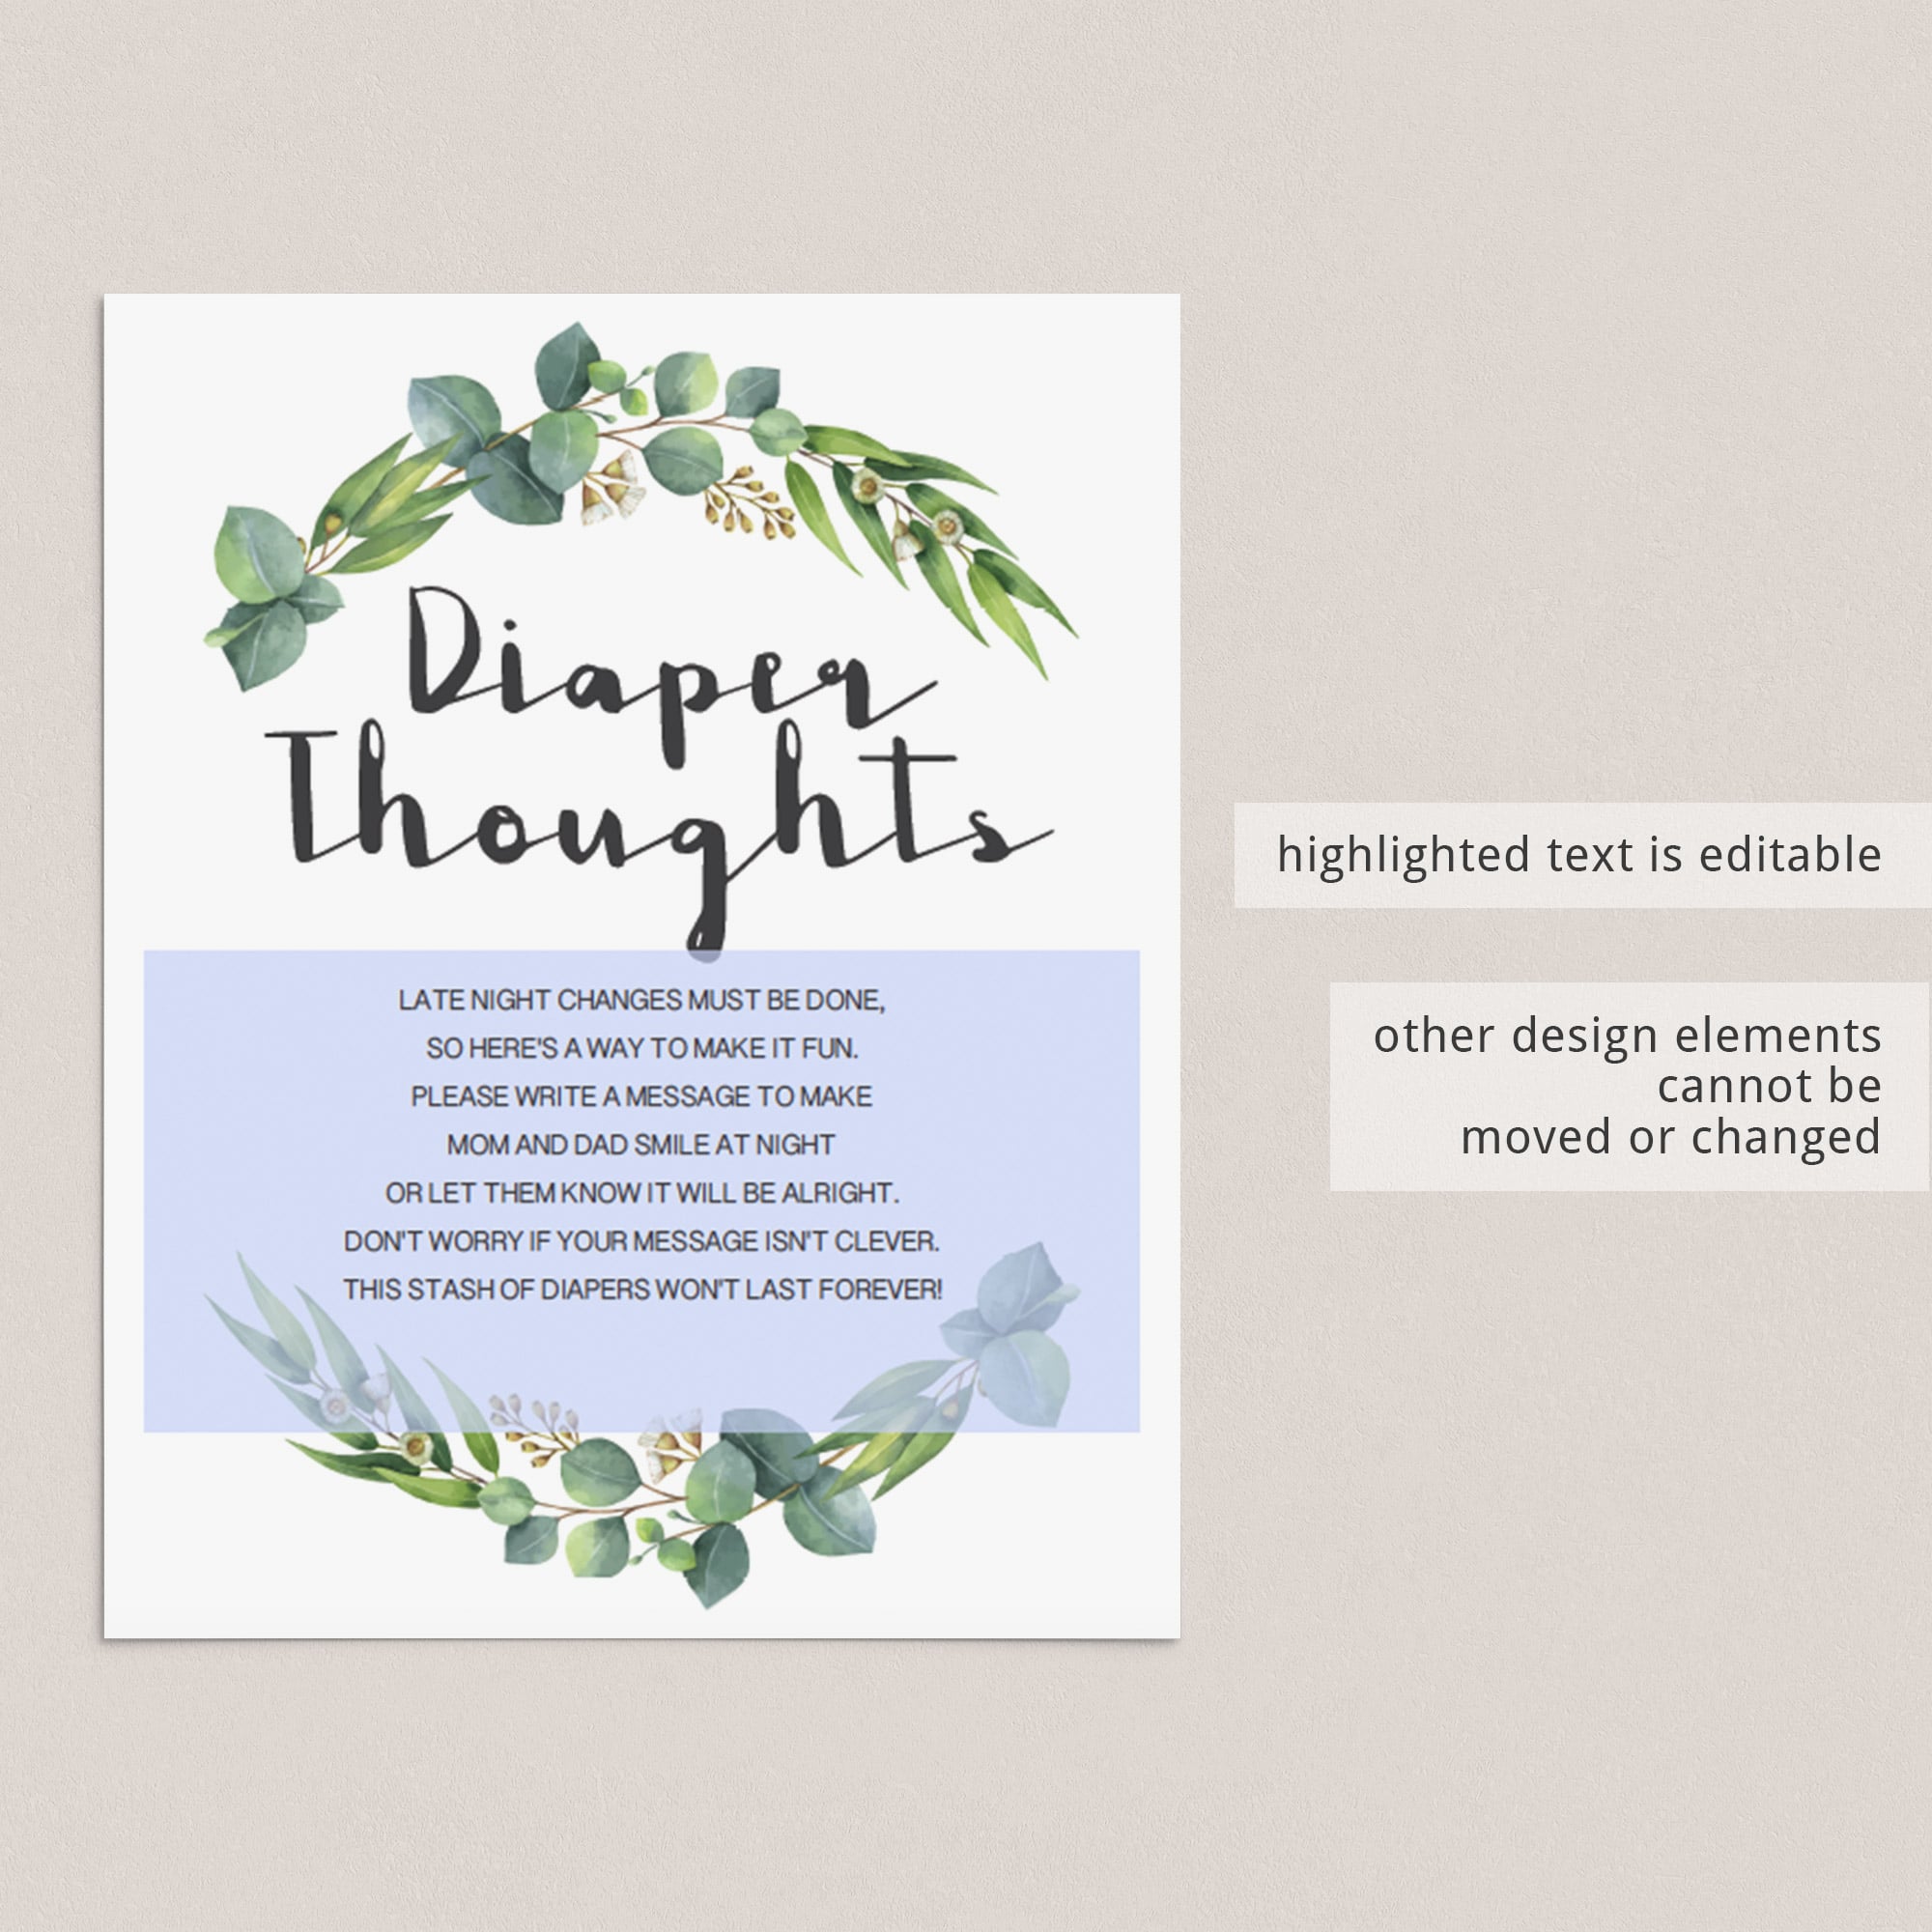 DIY diaper thoughts station table sign green wreath by LittleSizzle